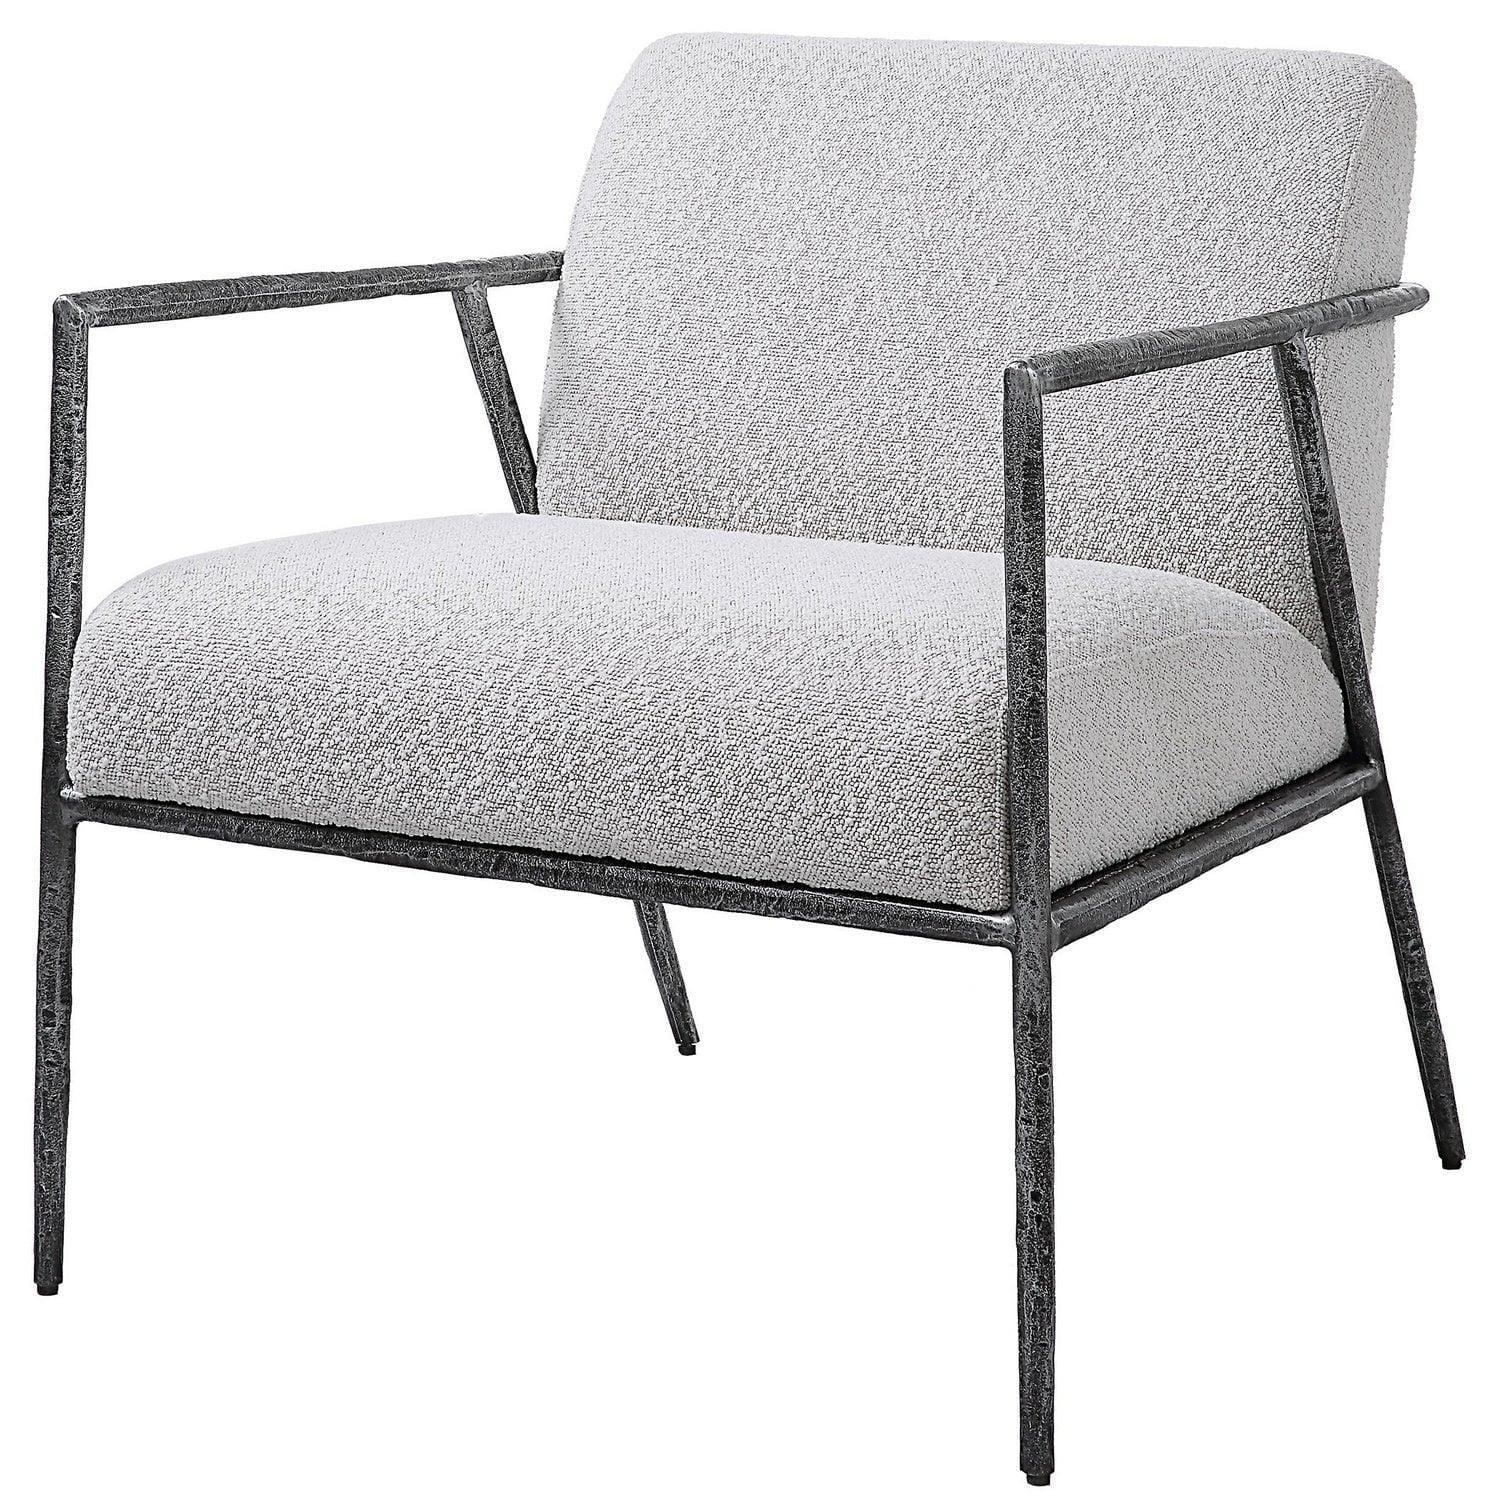 The Uttermost - Brisbane Accent Chair - 23660 | Montreal Lighting & Hardware